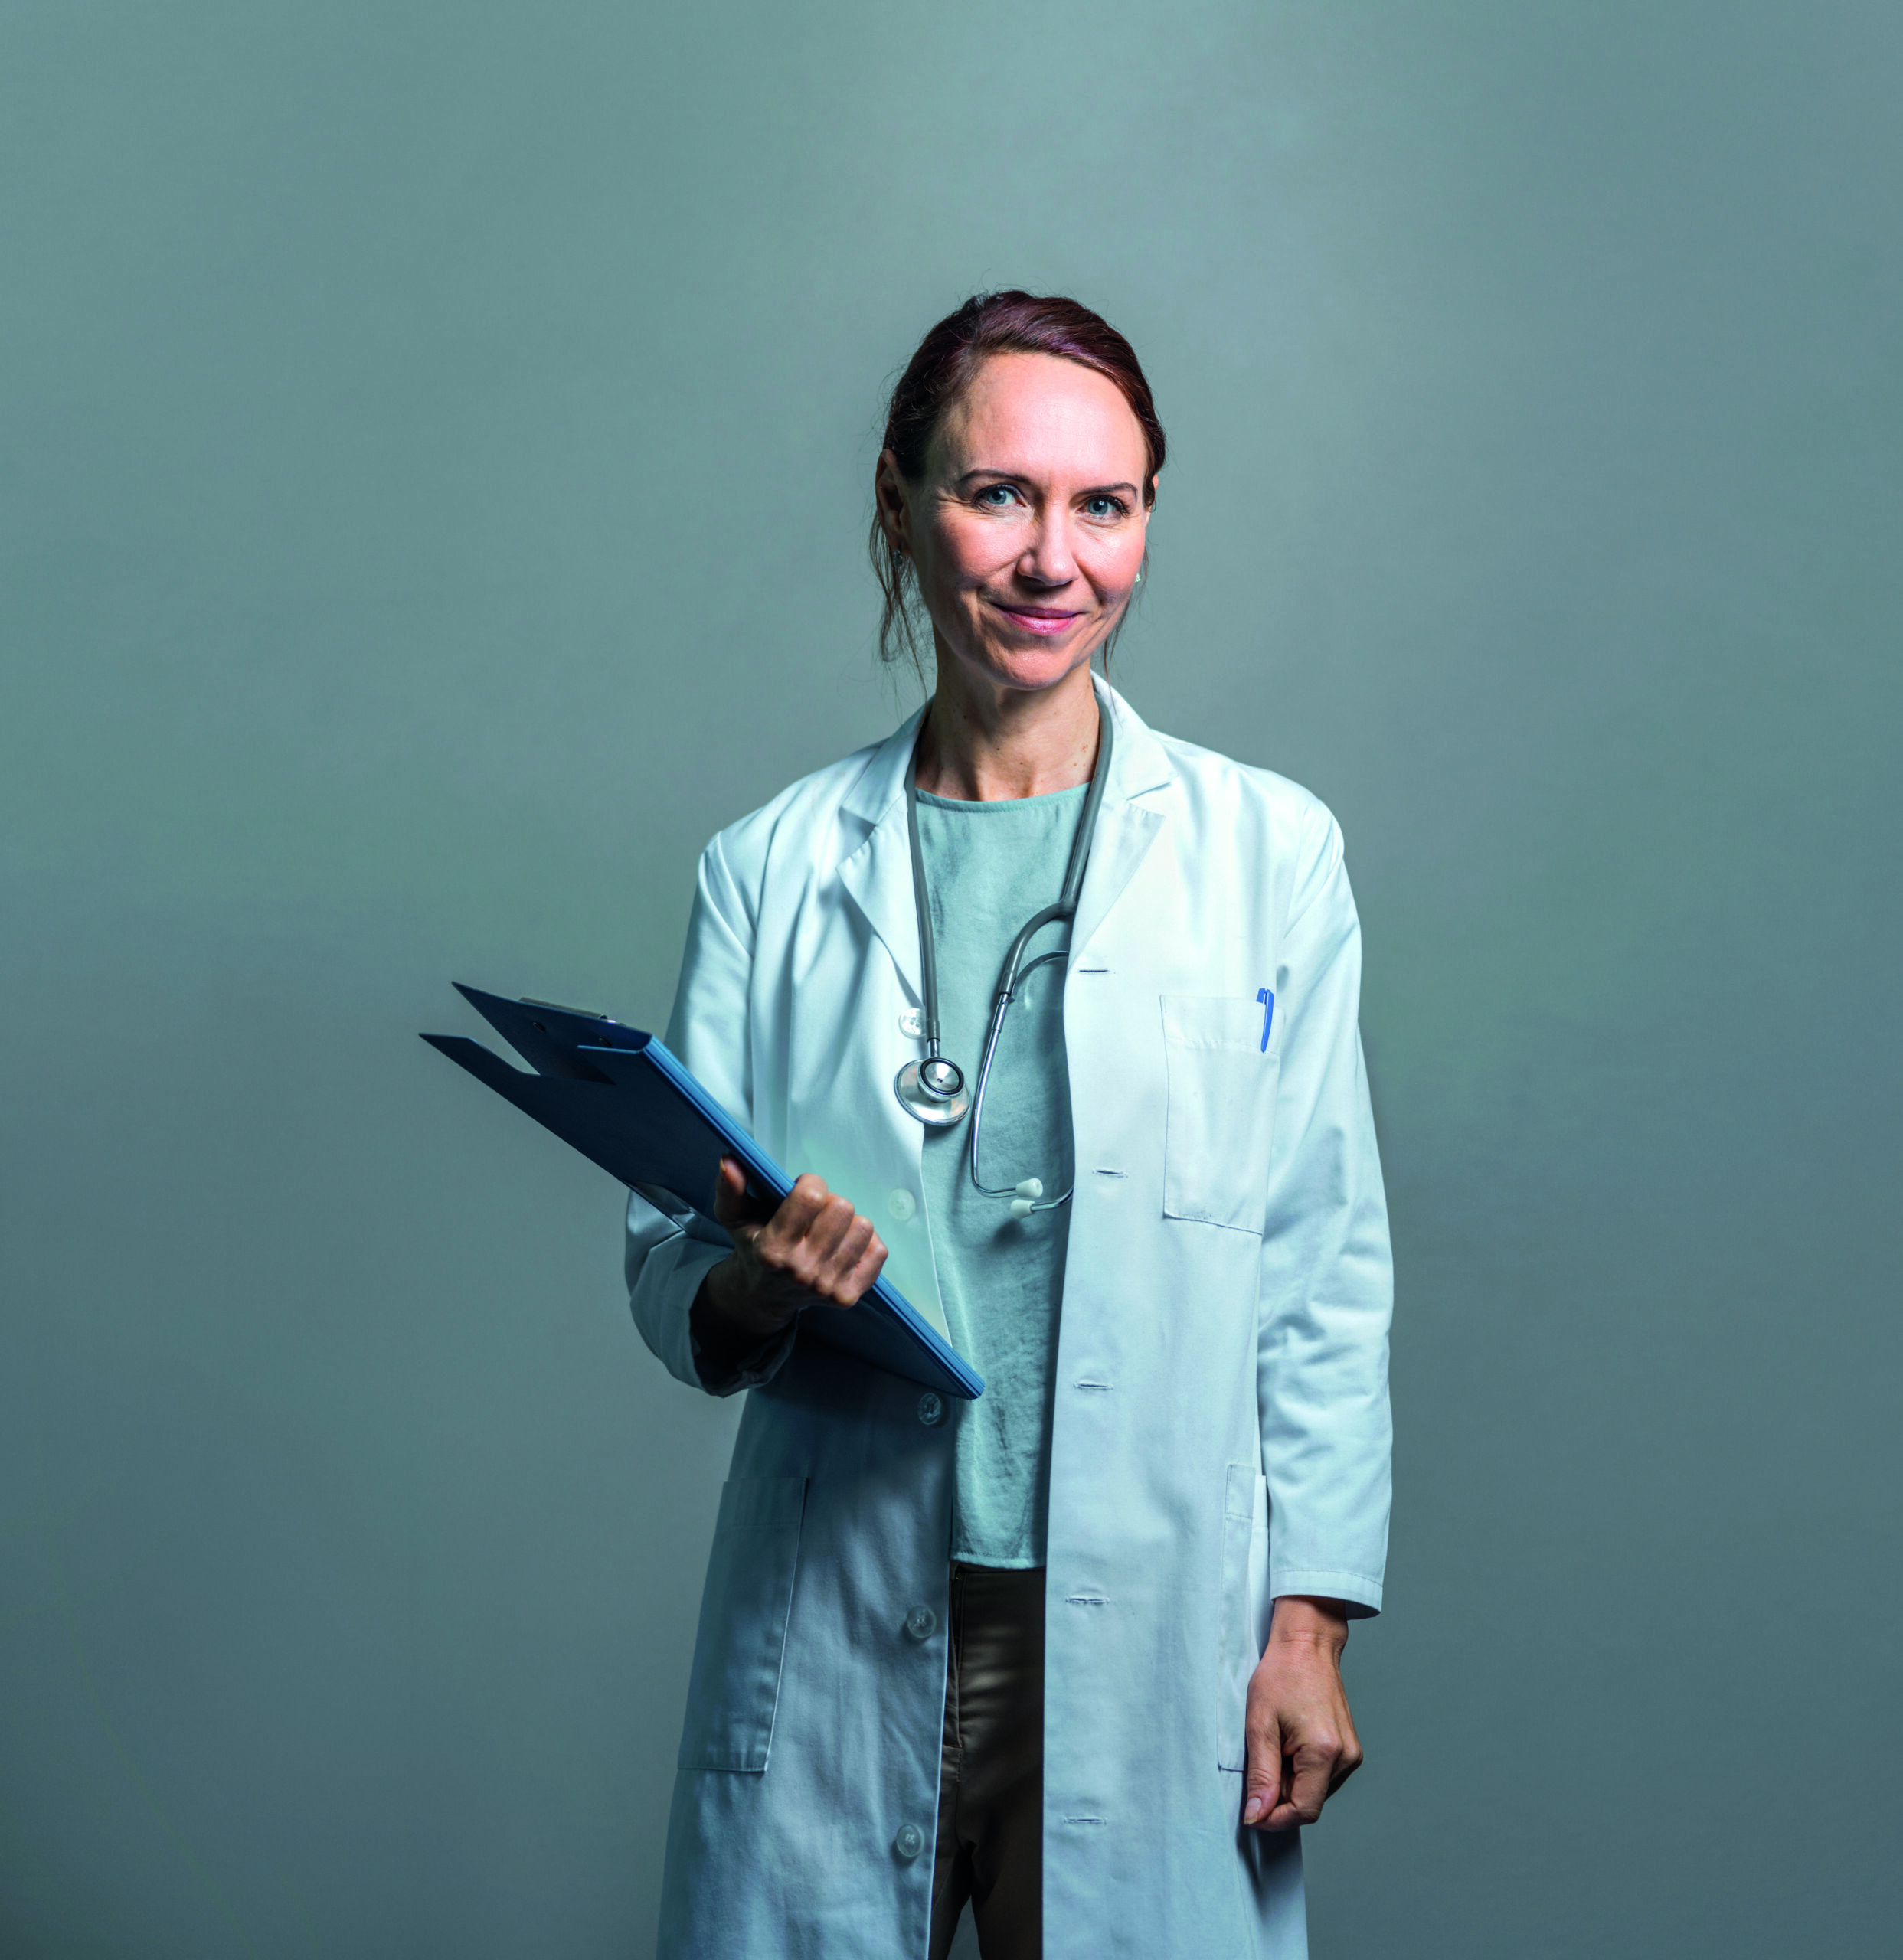 Portrait of confident mature doctor against wall